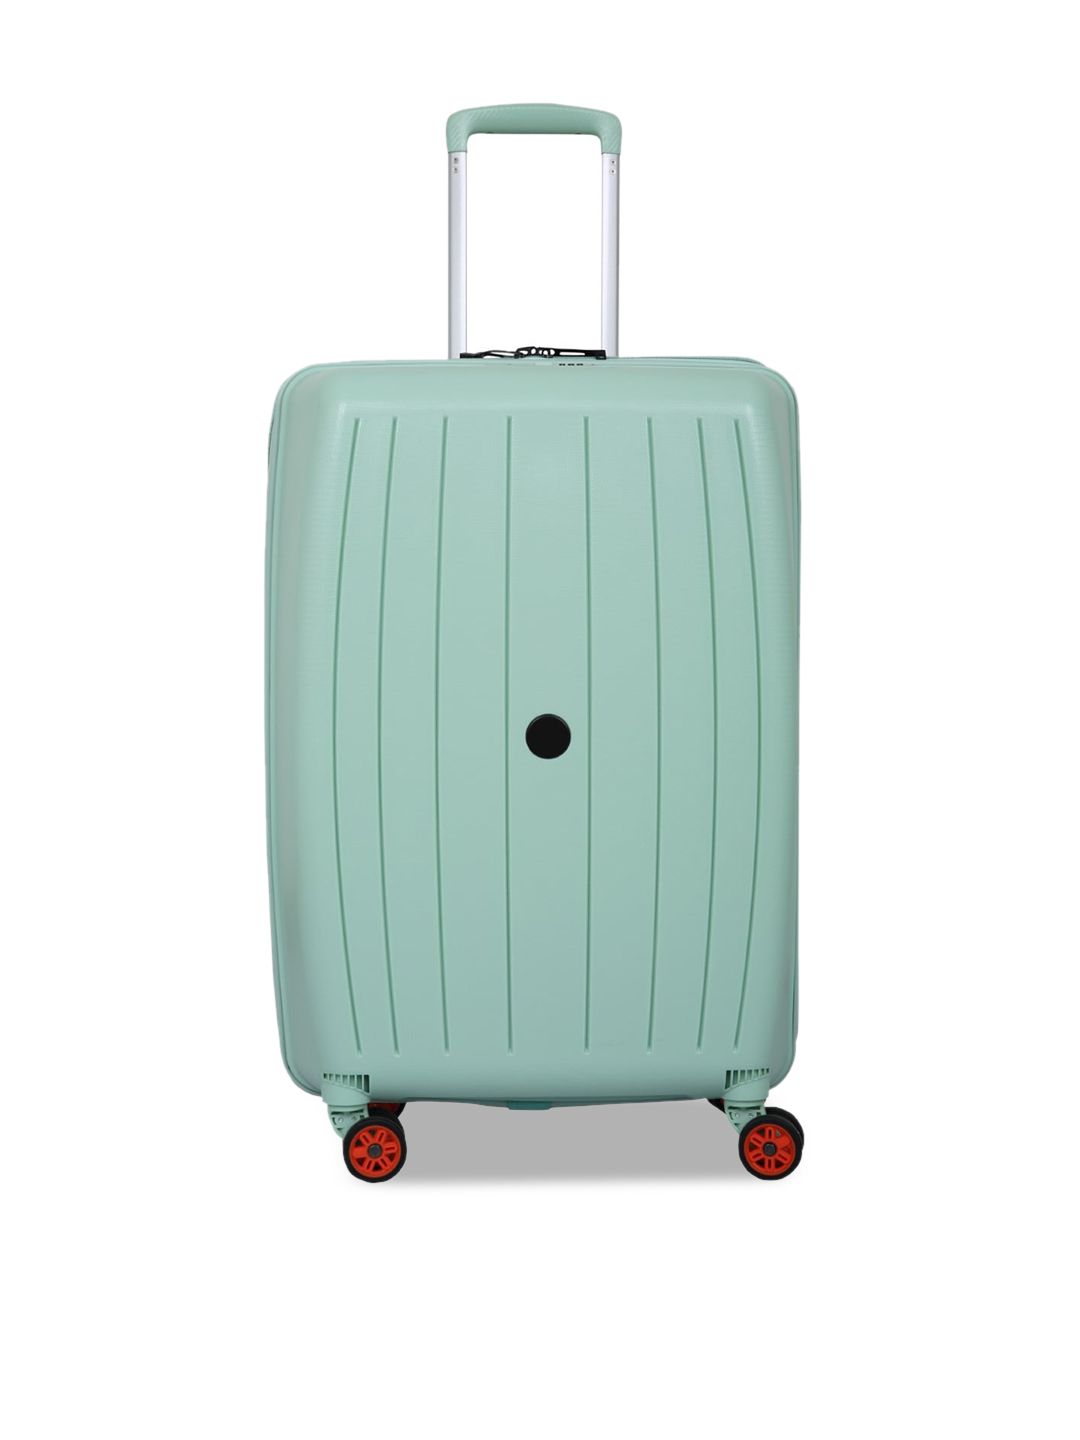 Polo Class Mint Green Hard Sided Trolley Bag - Small Price in India